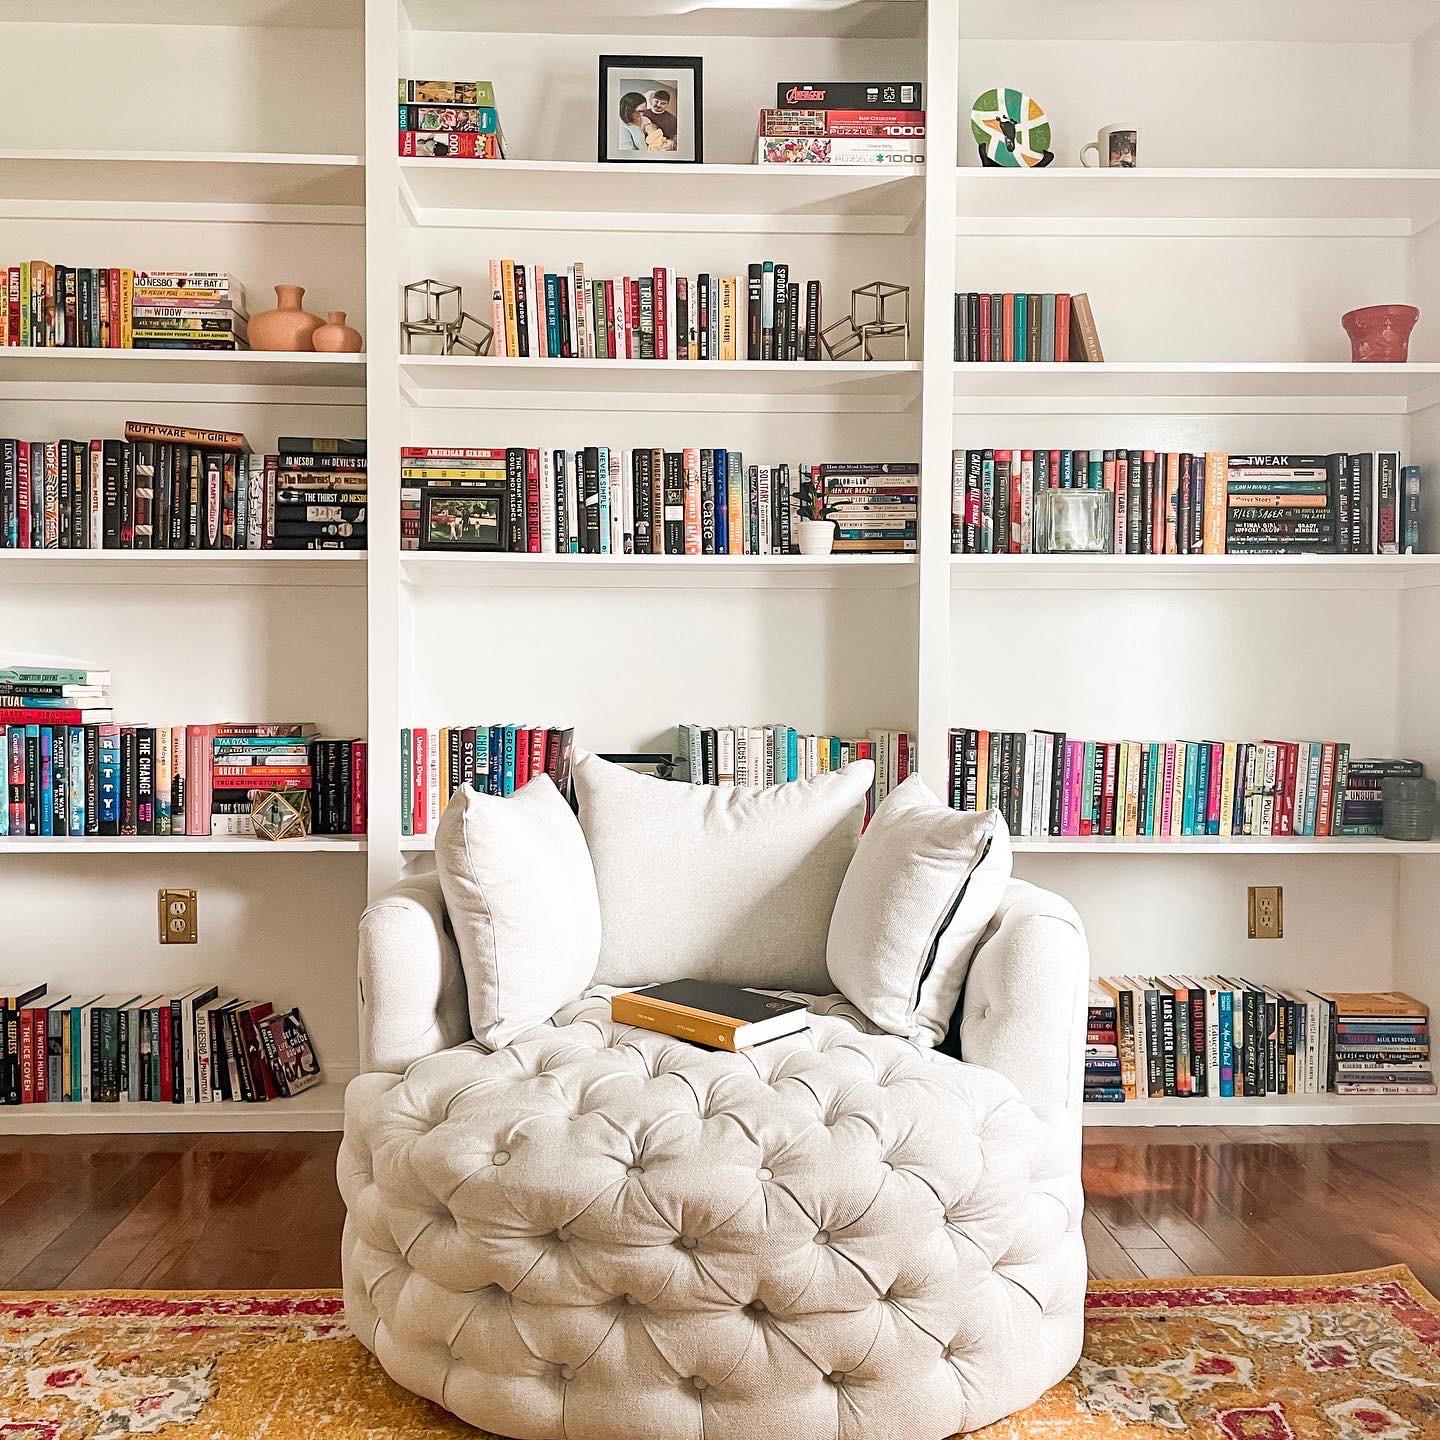 a large white, round reading chair sitting in front of floor-to-ceiling white bookshelves.